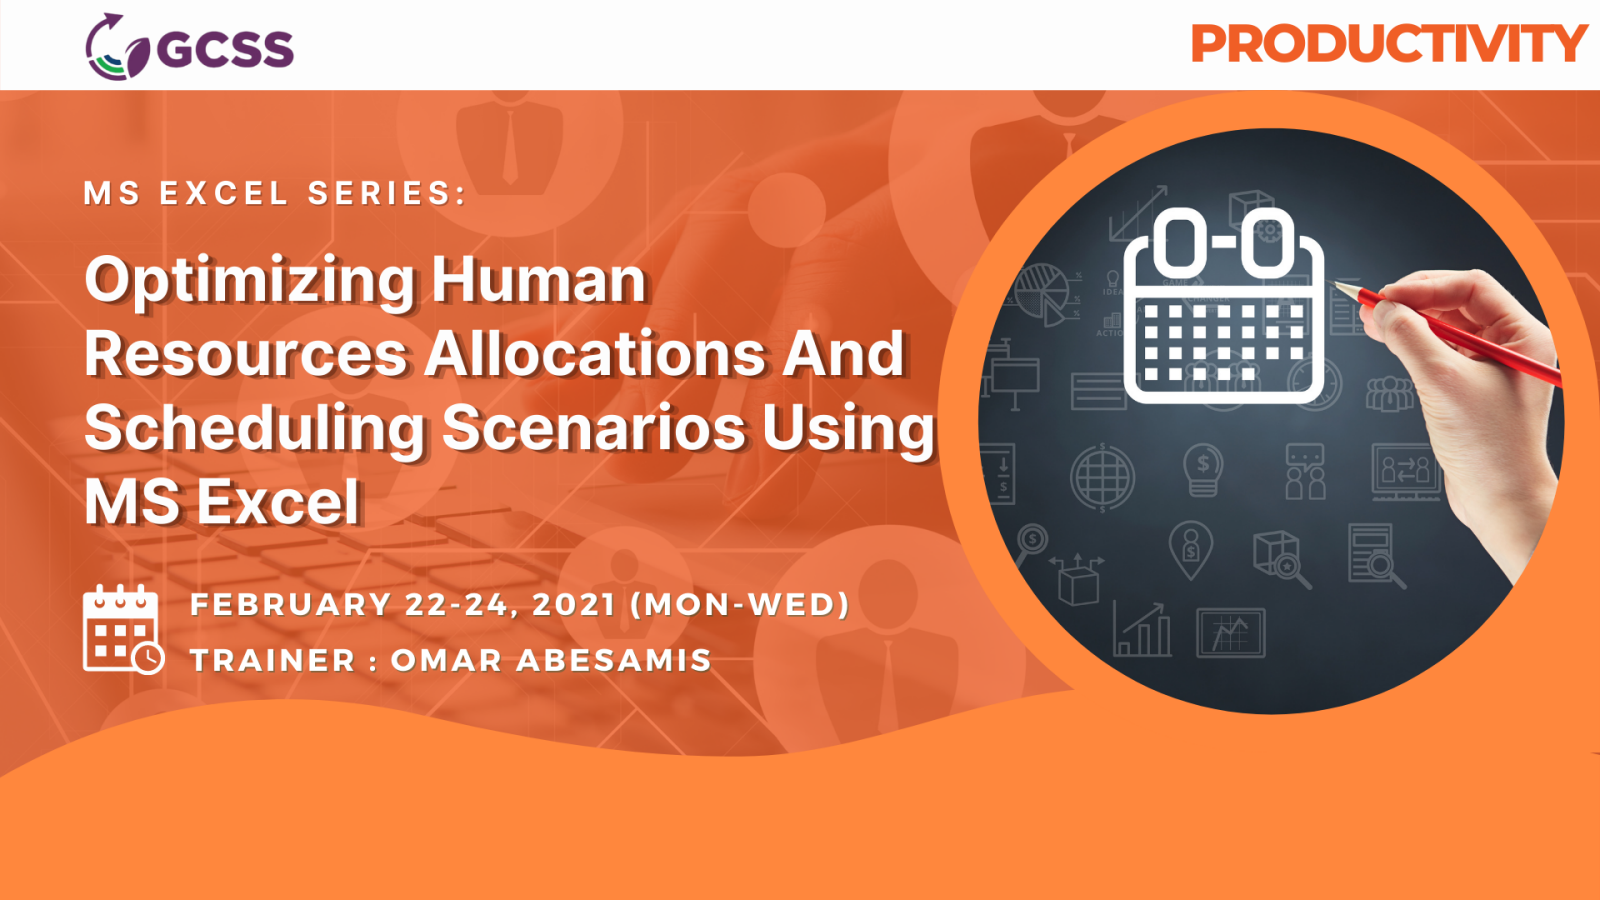 Optimizing Human Resources Allocations And Scheduling Scenarios Using MS Excel, Manila, National Capital Region, Philippines